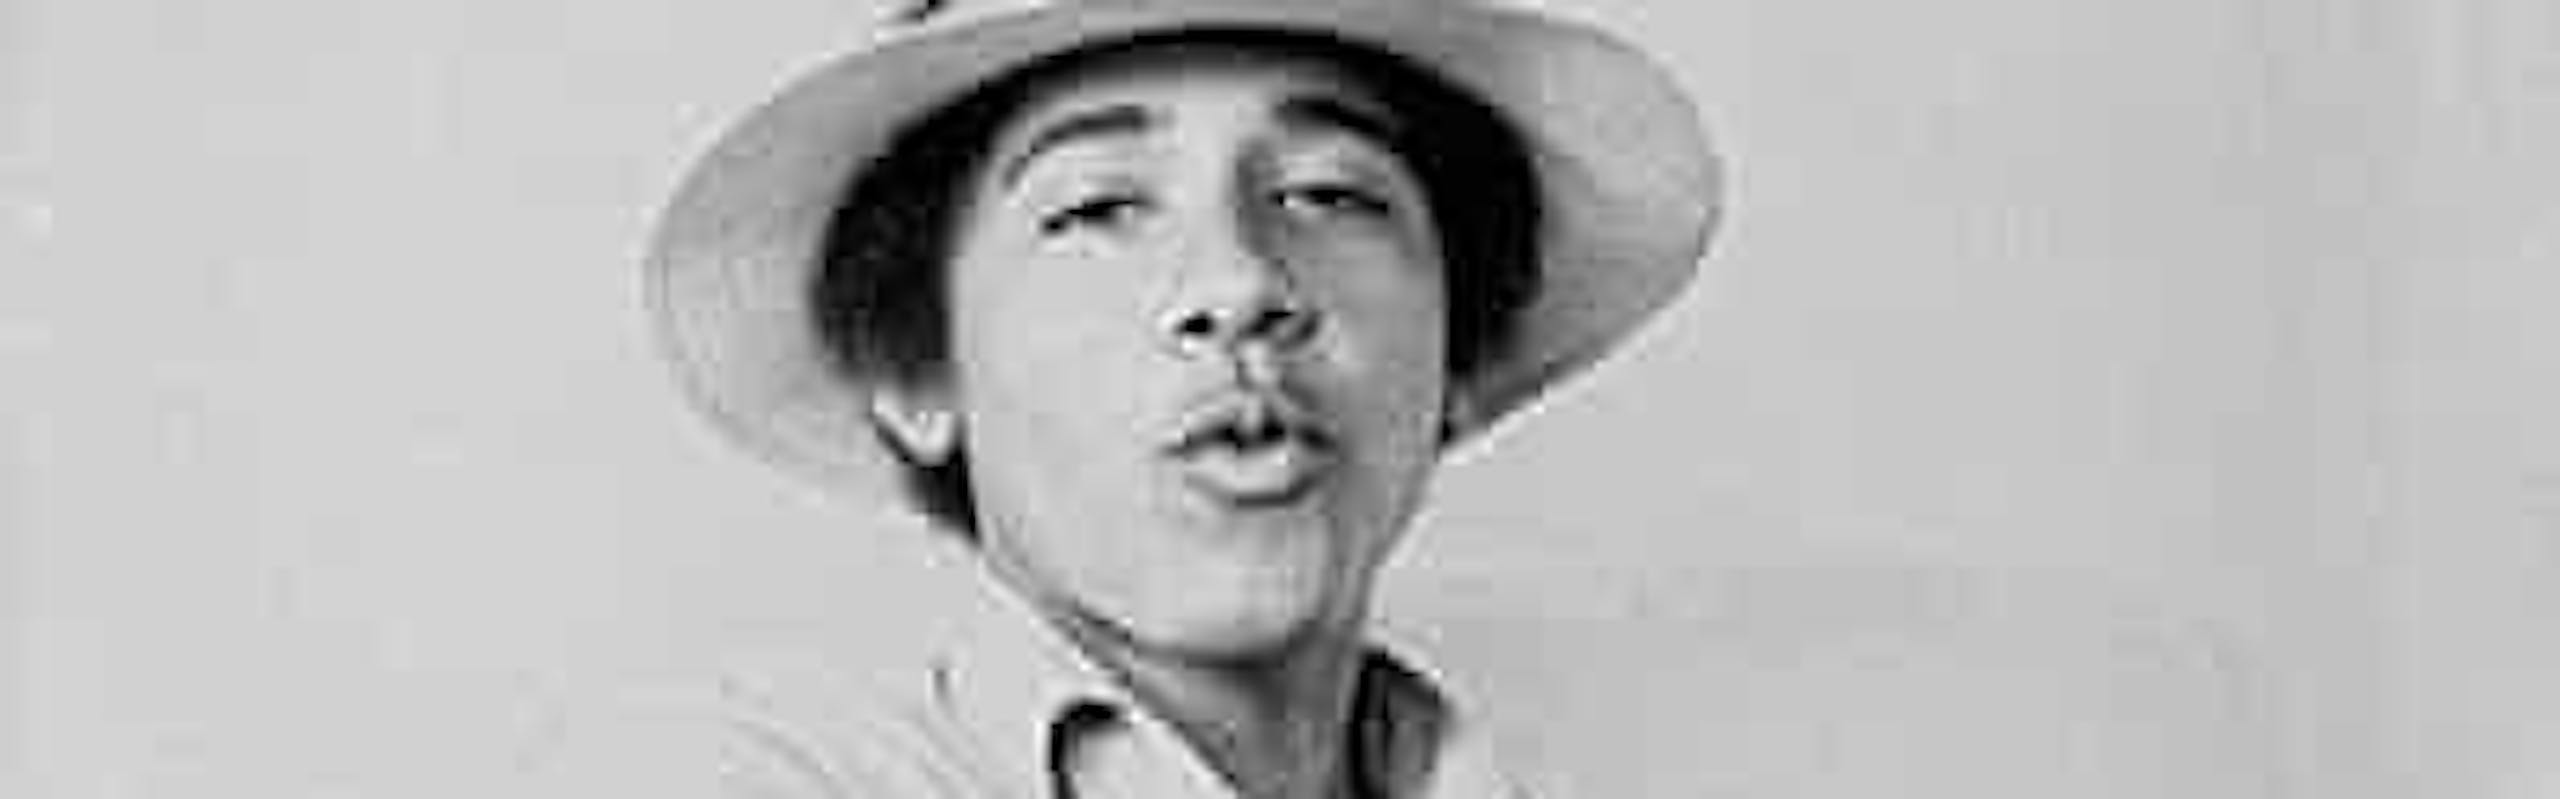 Young Barack Obama wearing a top hat, a polo shirt, and jeans